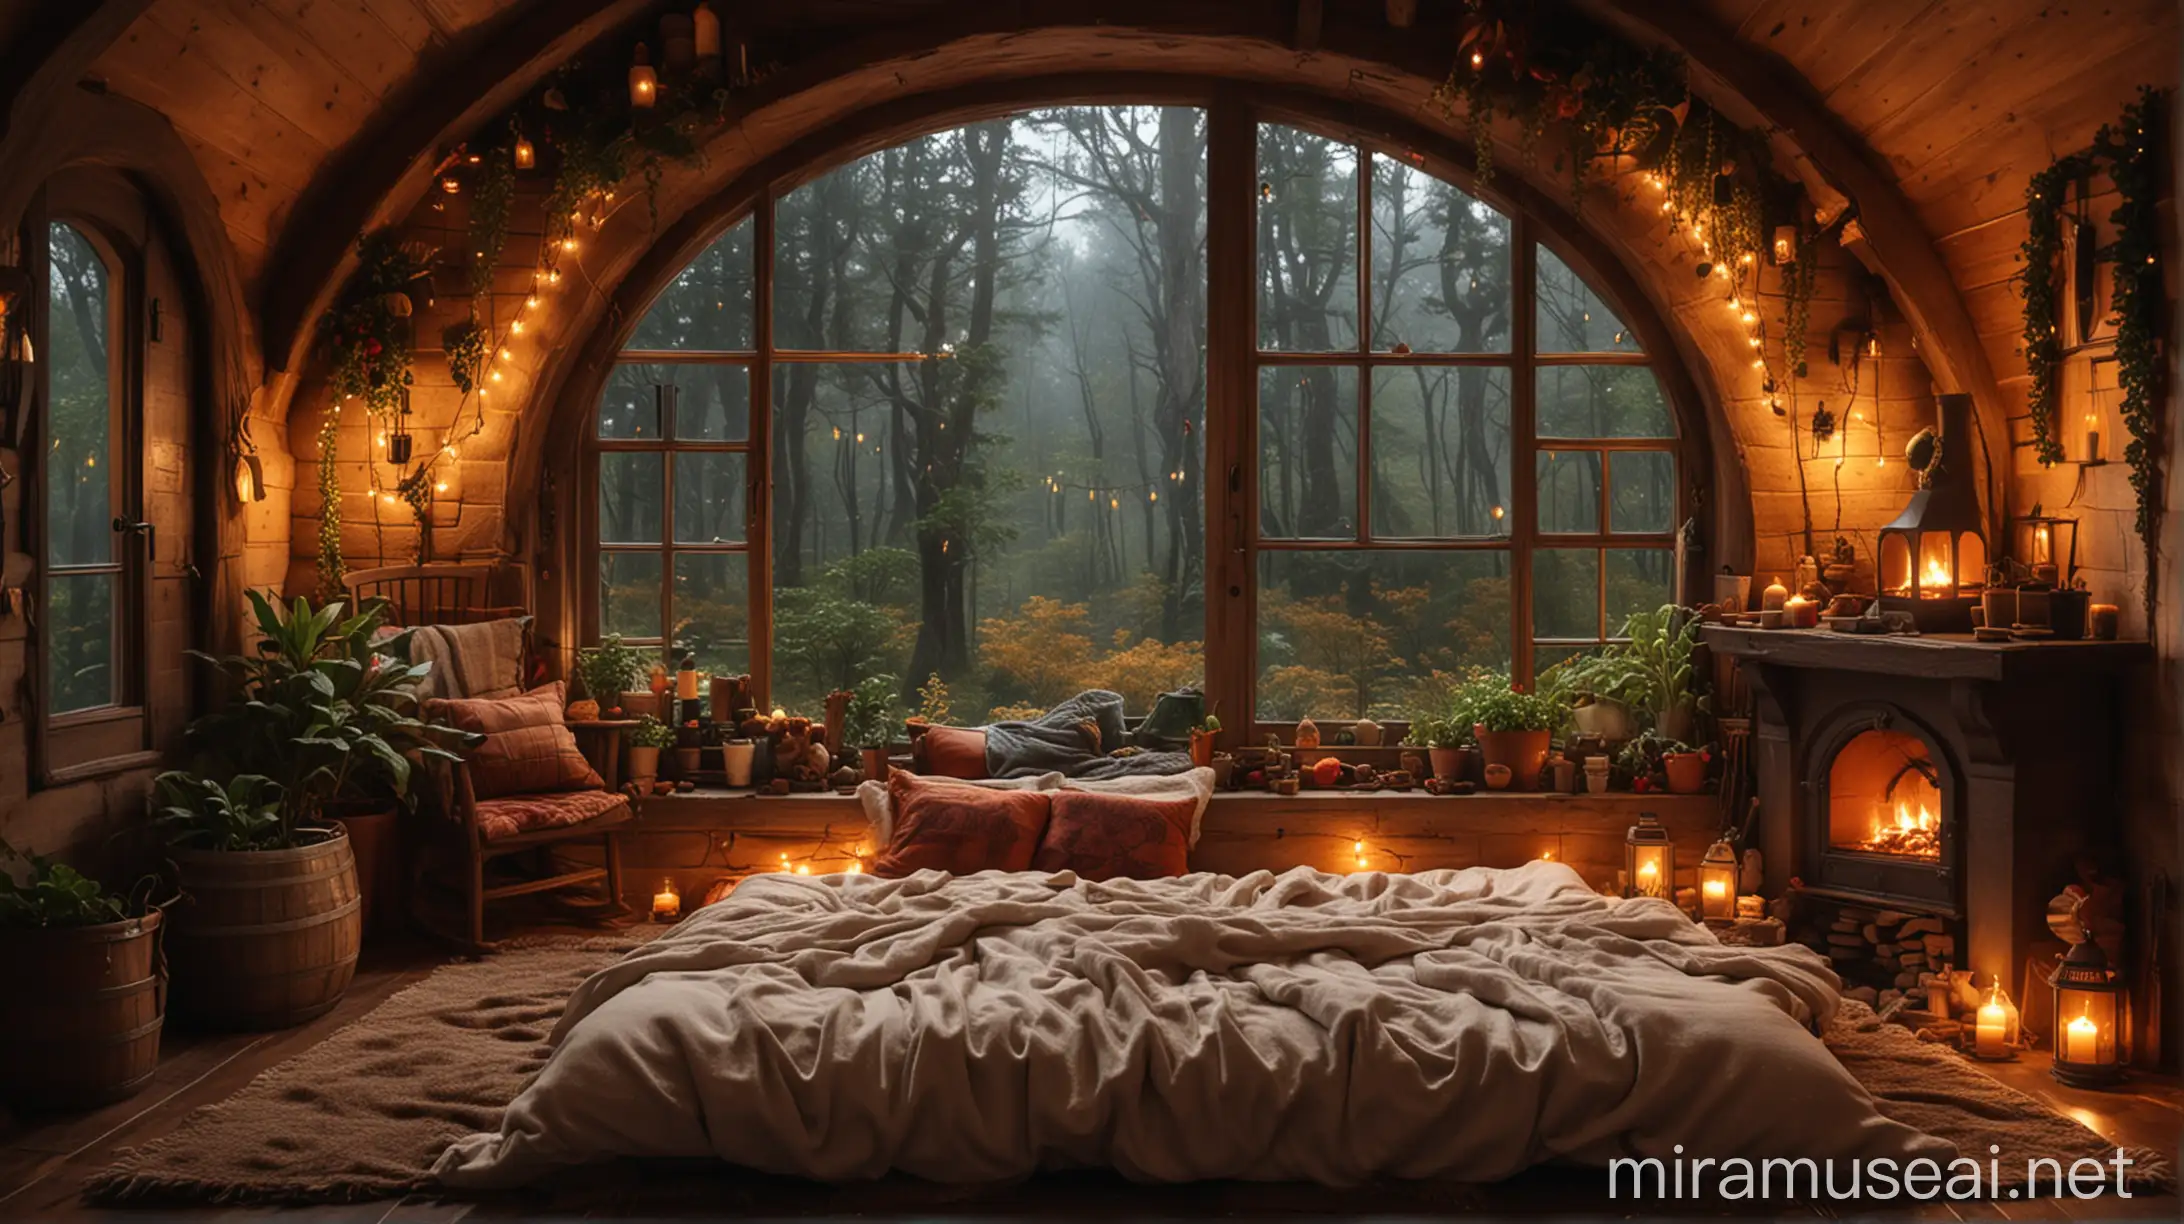 Cozy hobbit room, with two small cozy plants, pillows, string lights, blankets, fireplace box, big window with a rainy fall night deep forest view., Mysterious with fireplace box sia view